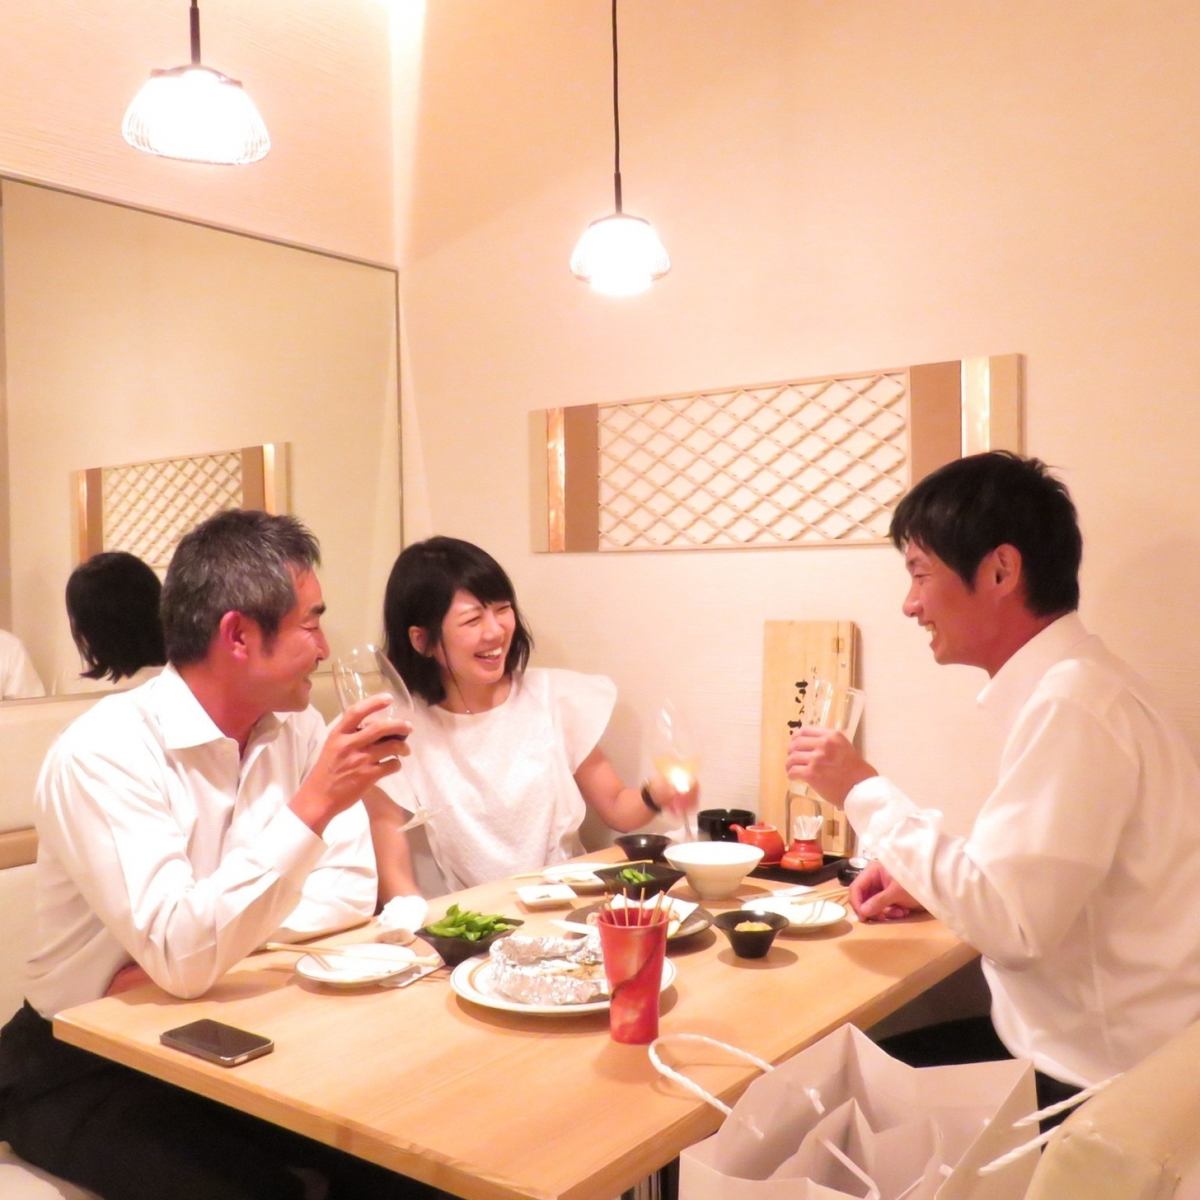 The high-quality Japanese space is perfect for a date.Have a blissful time with your loved ones....